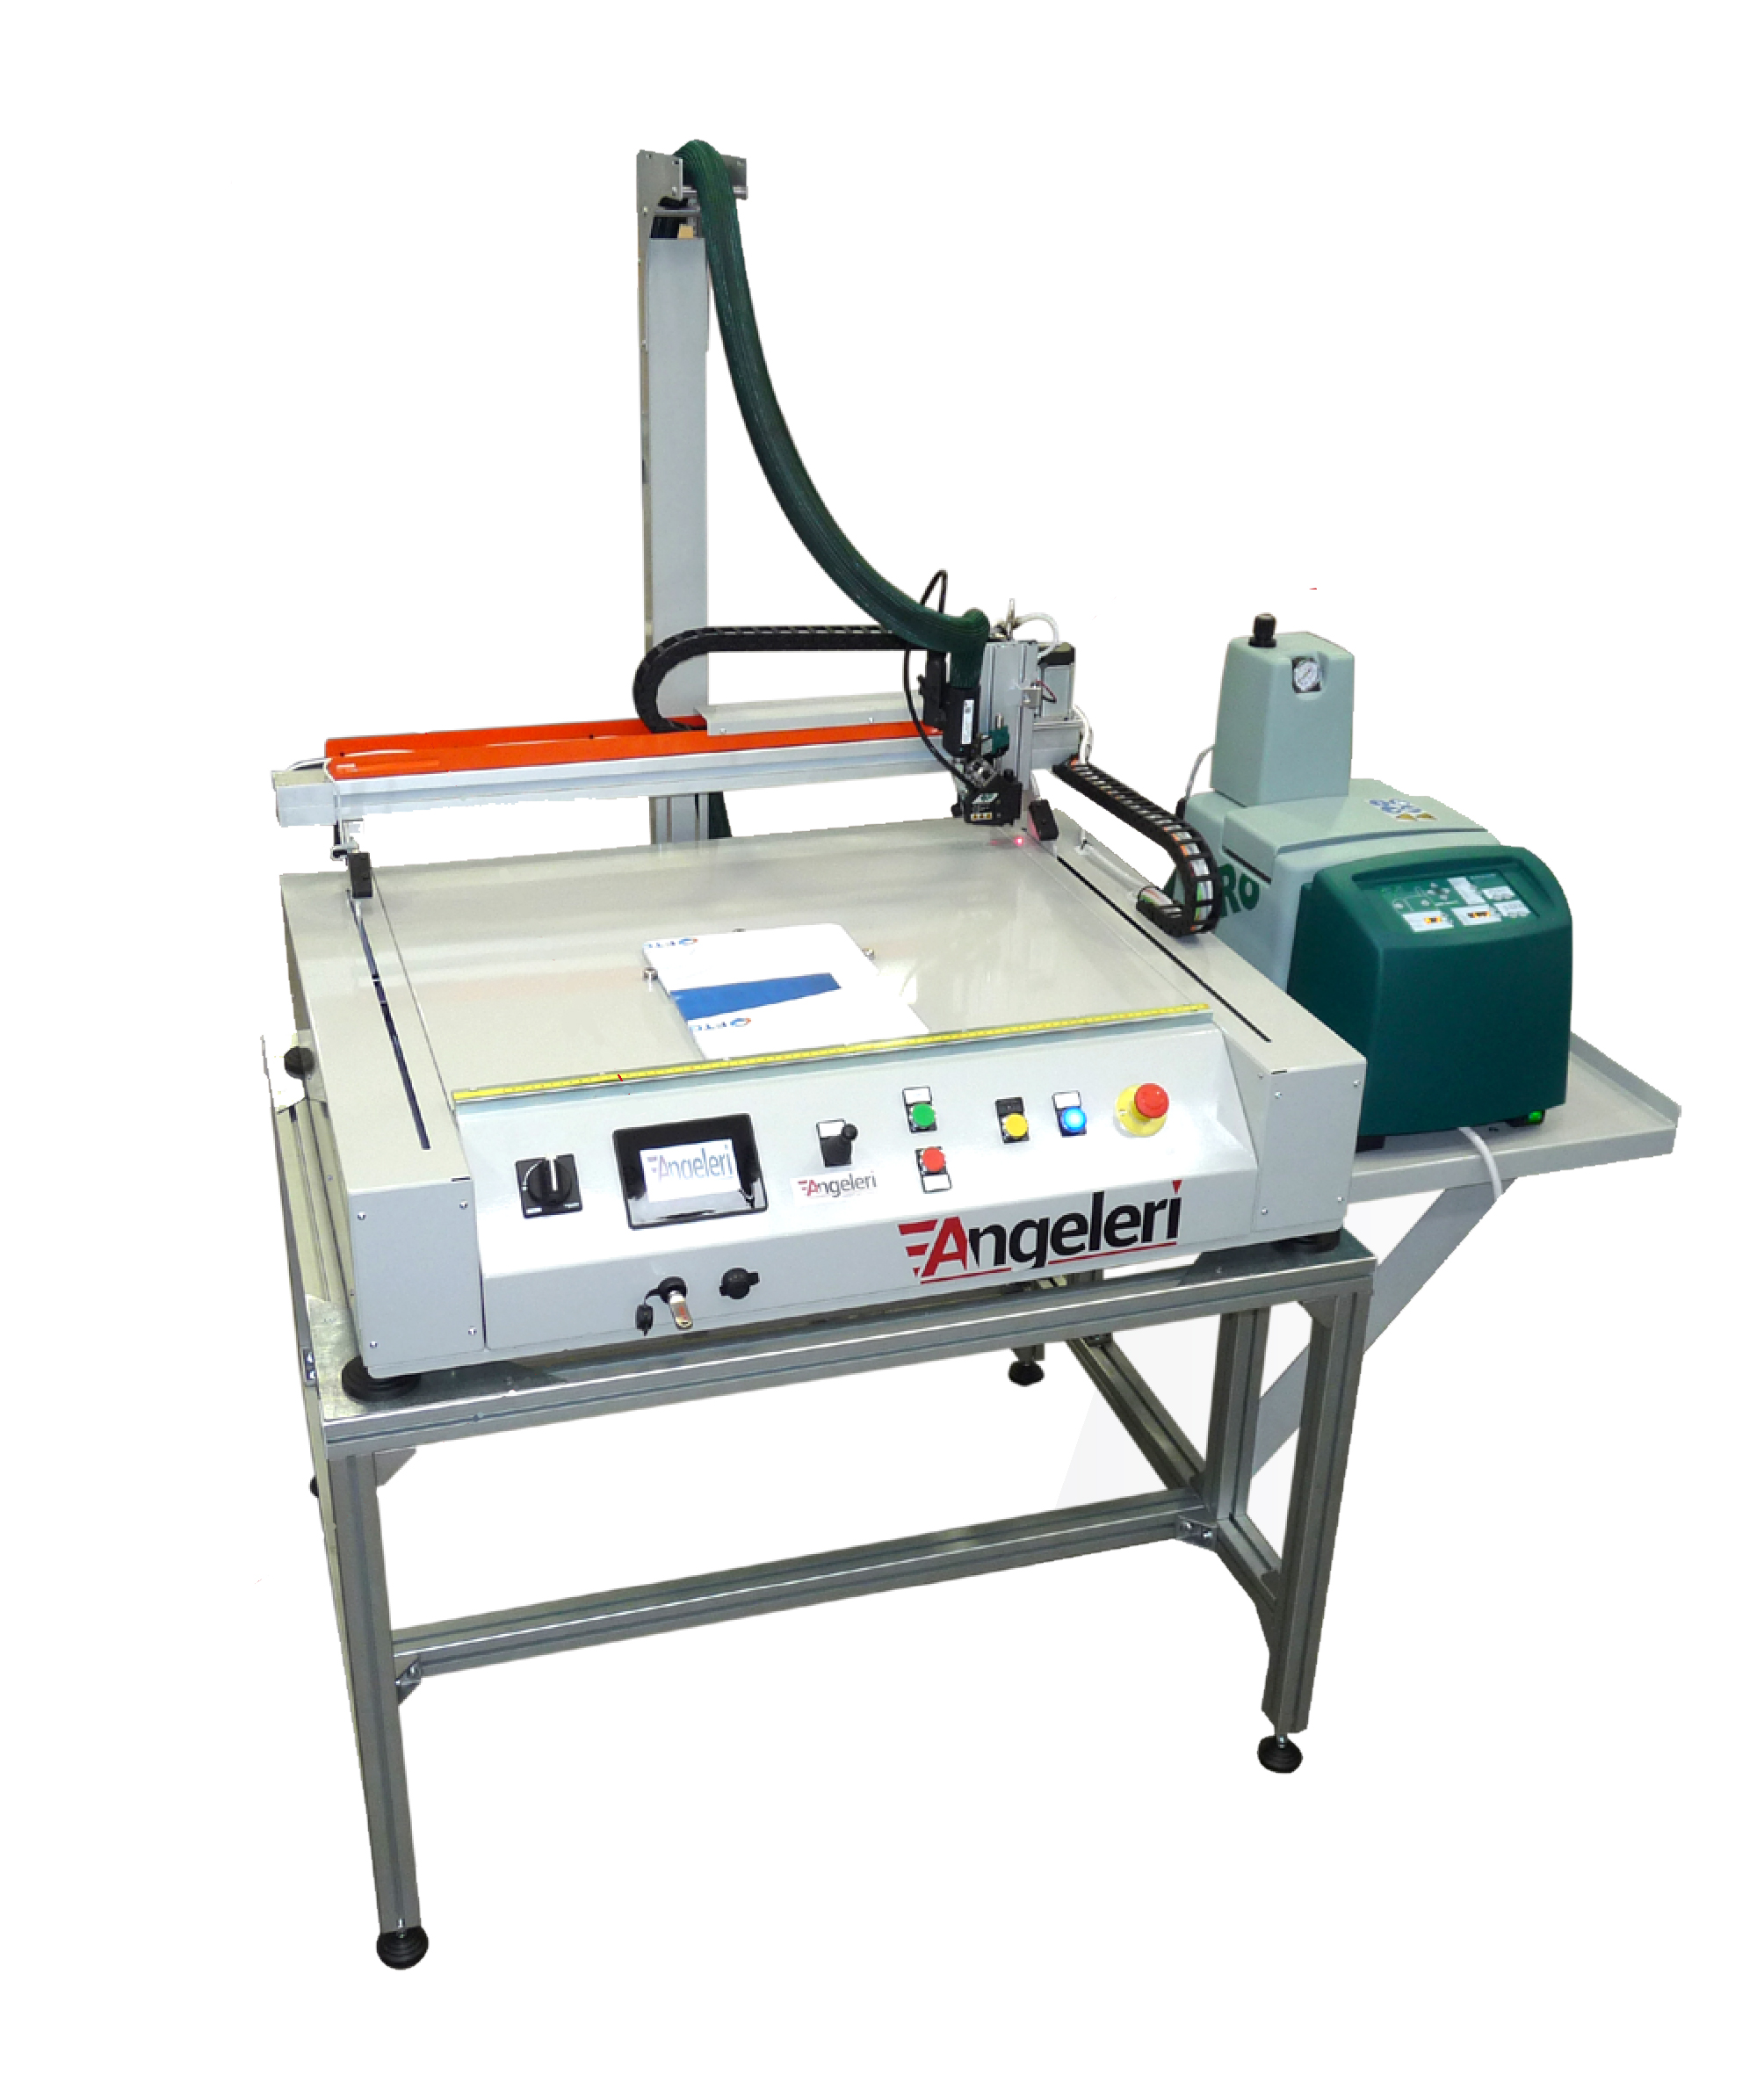 Automatic gluing equipment & accessories: GP 8060